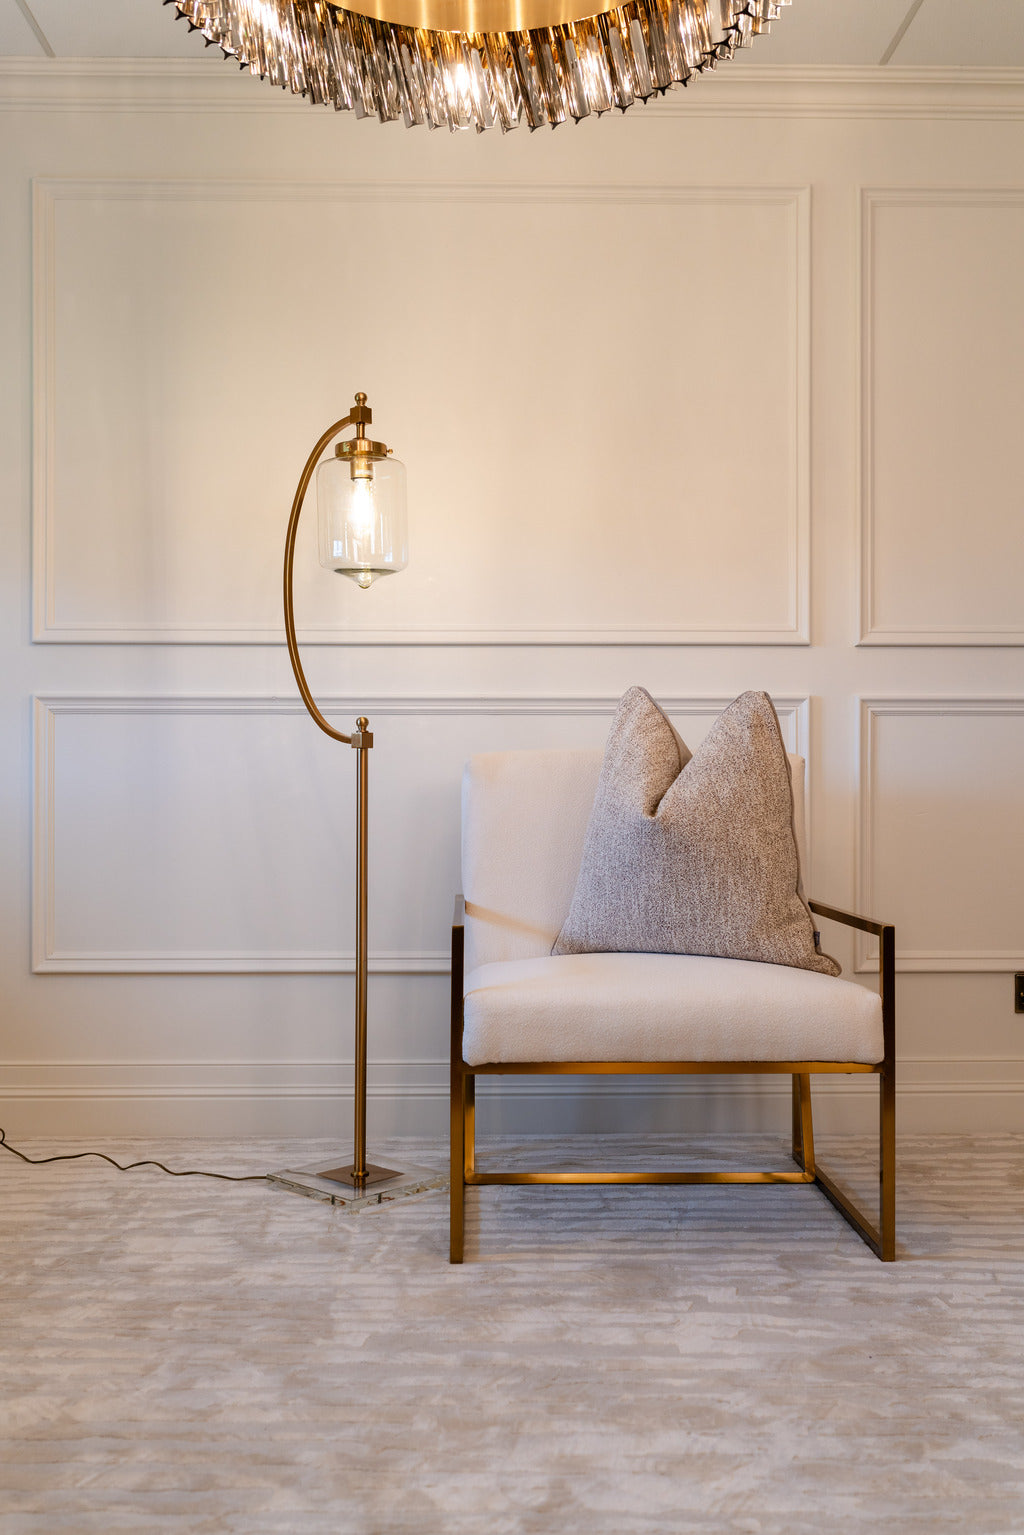 Floor lamps, Gold lamp, gold chair, Interiors  